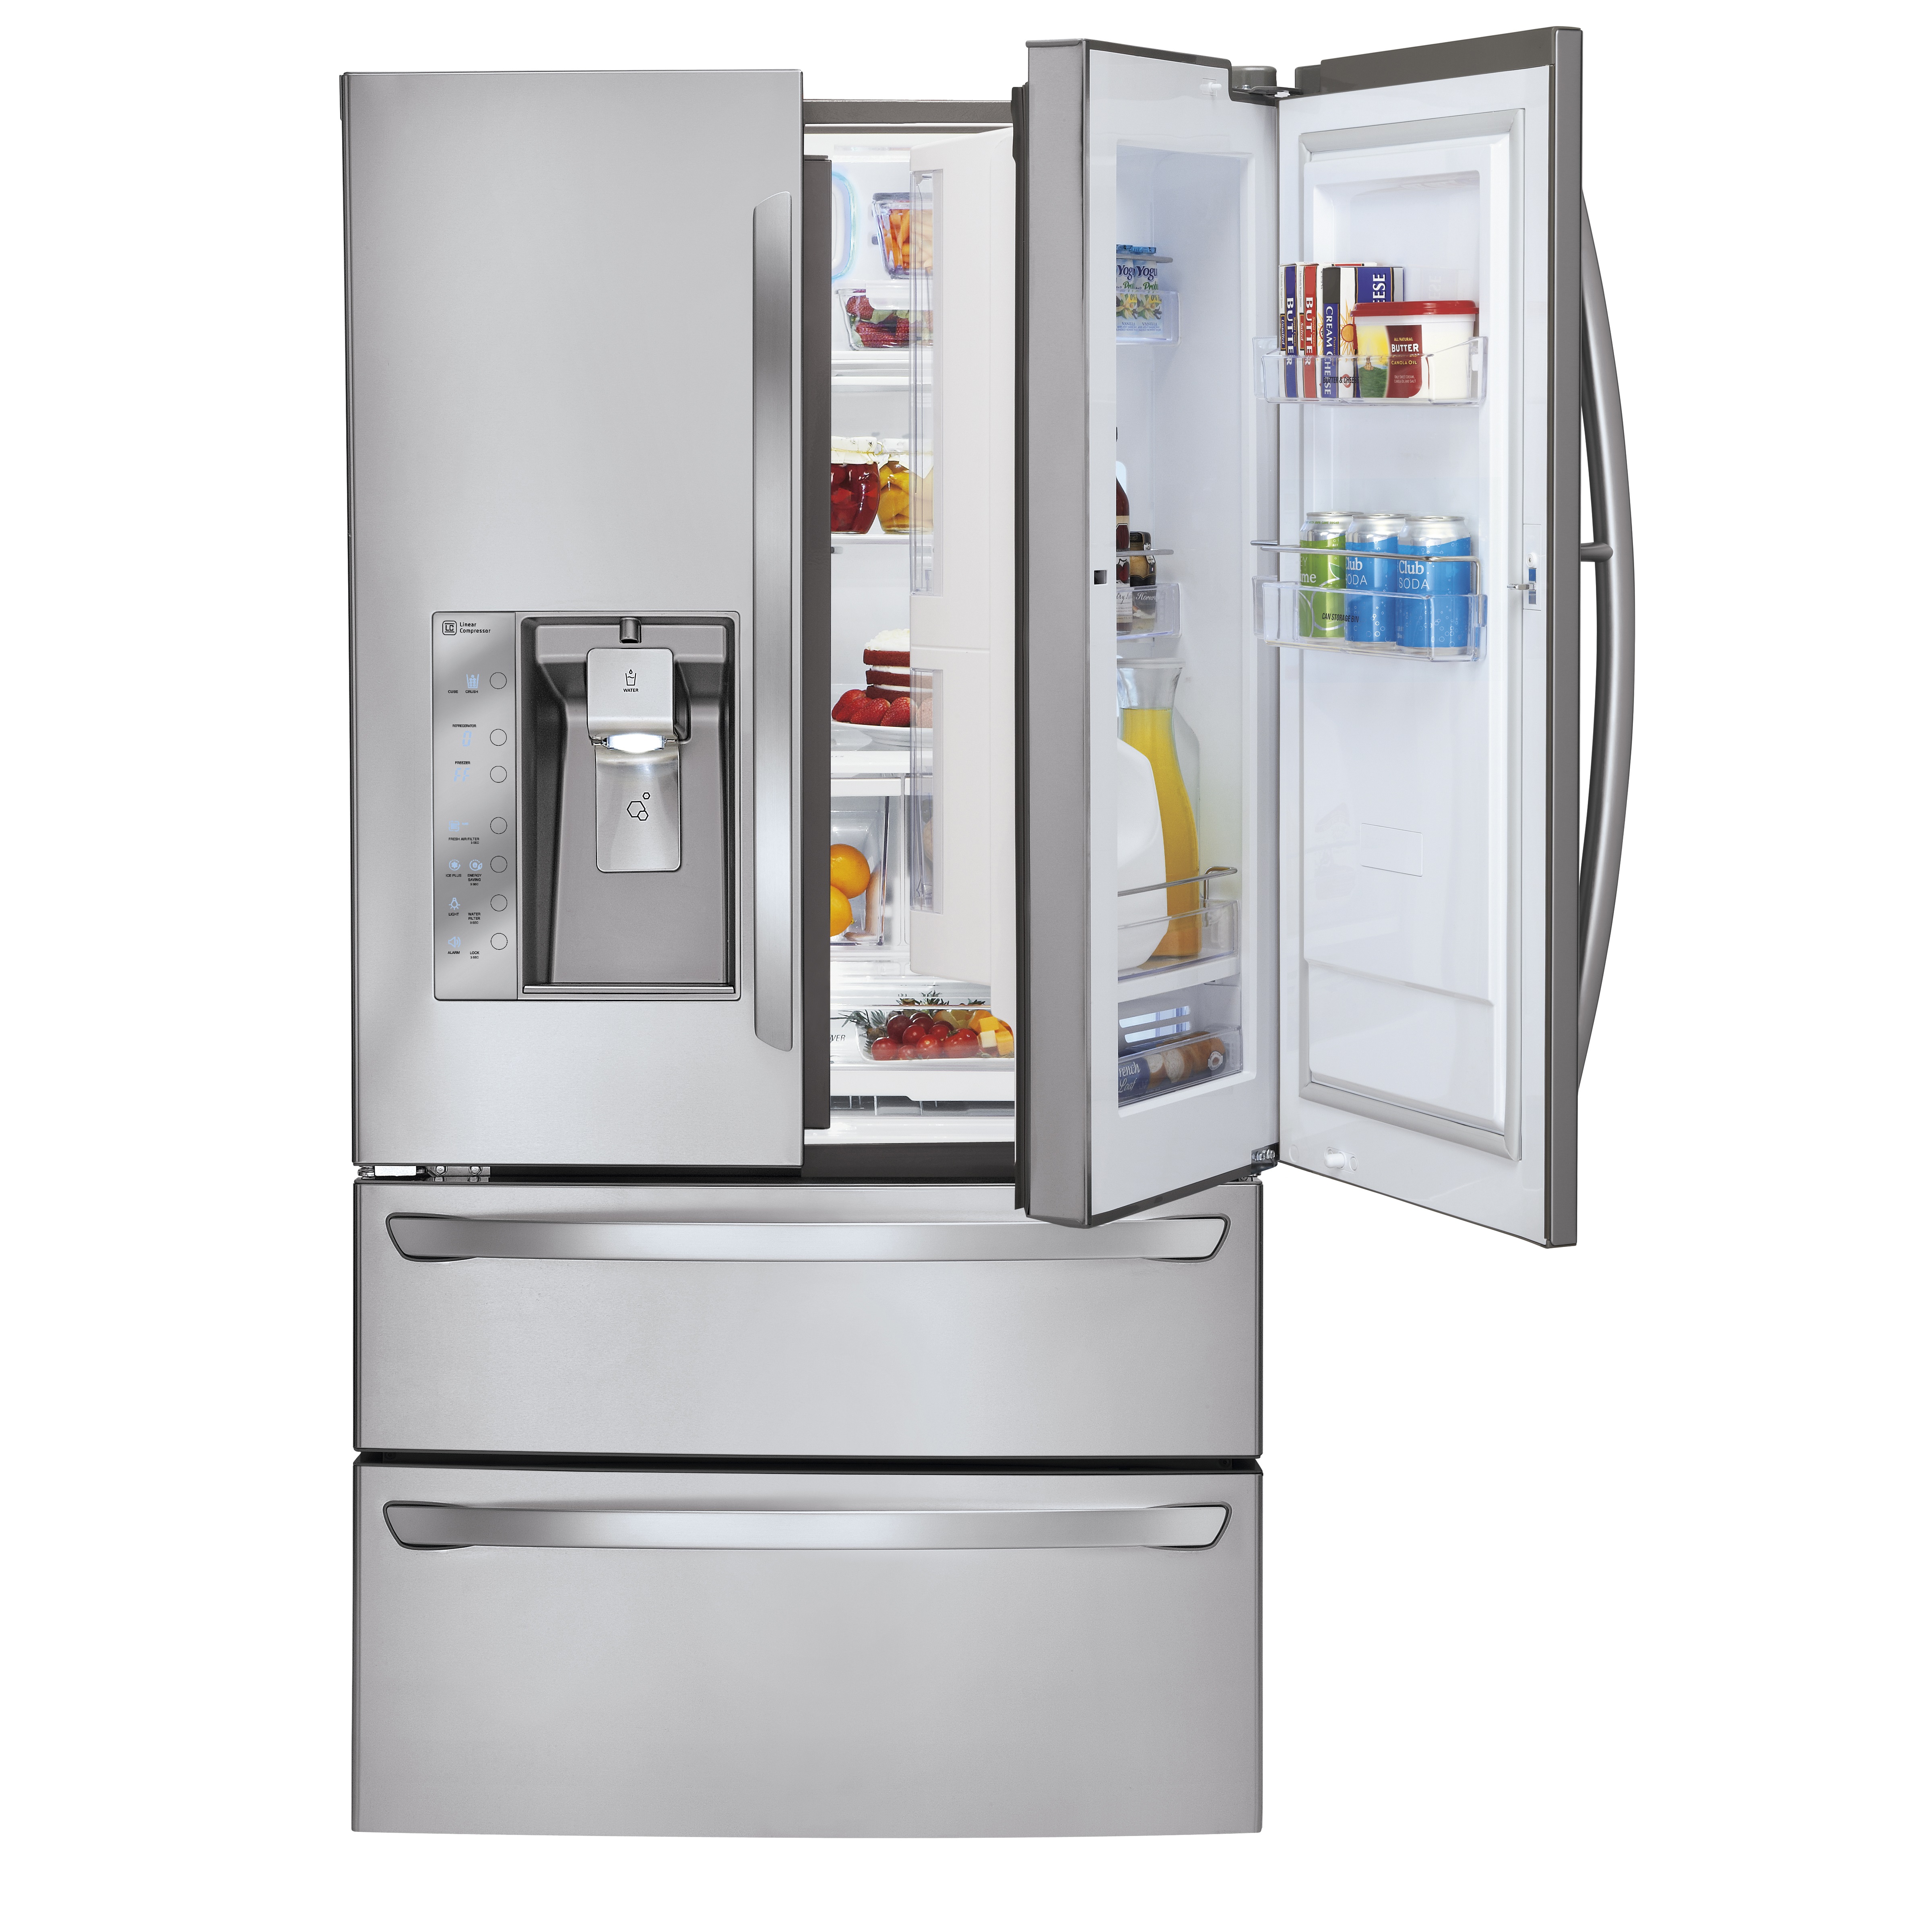 LG’S NEWEST REFRIGERATORS EXPECTED TO TURN HEADS AT CES 2014 LG Newsroom